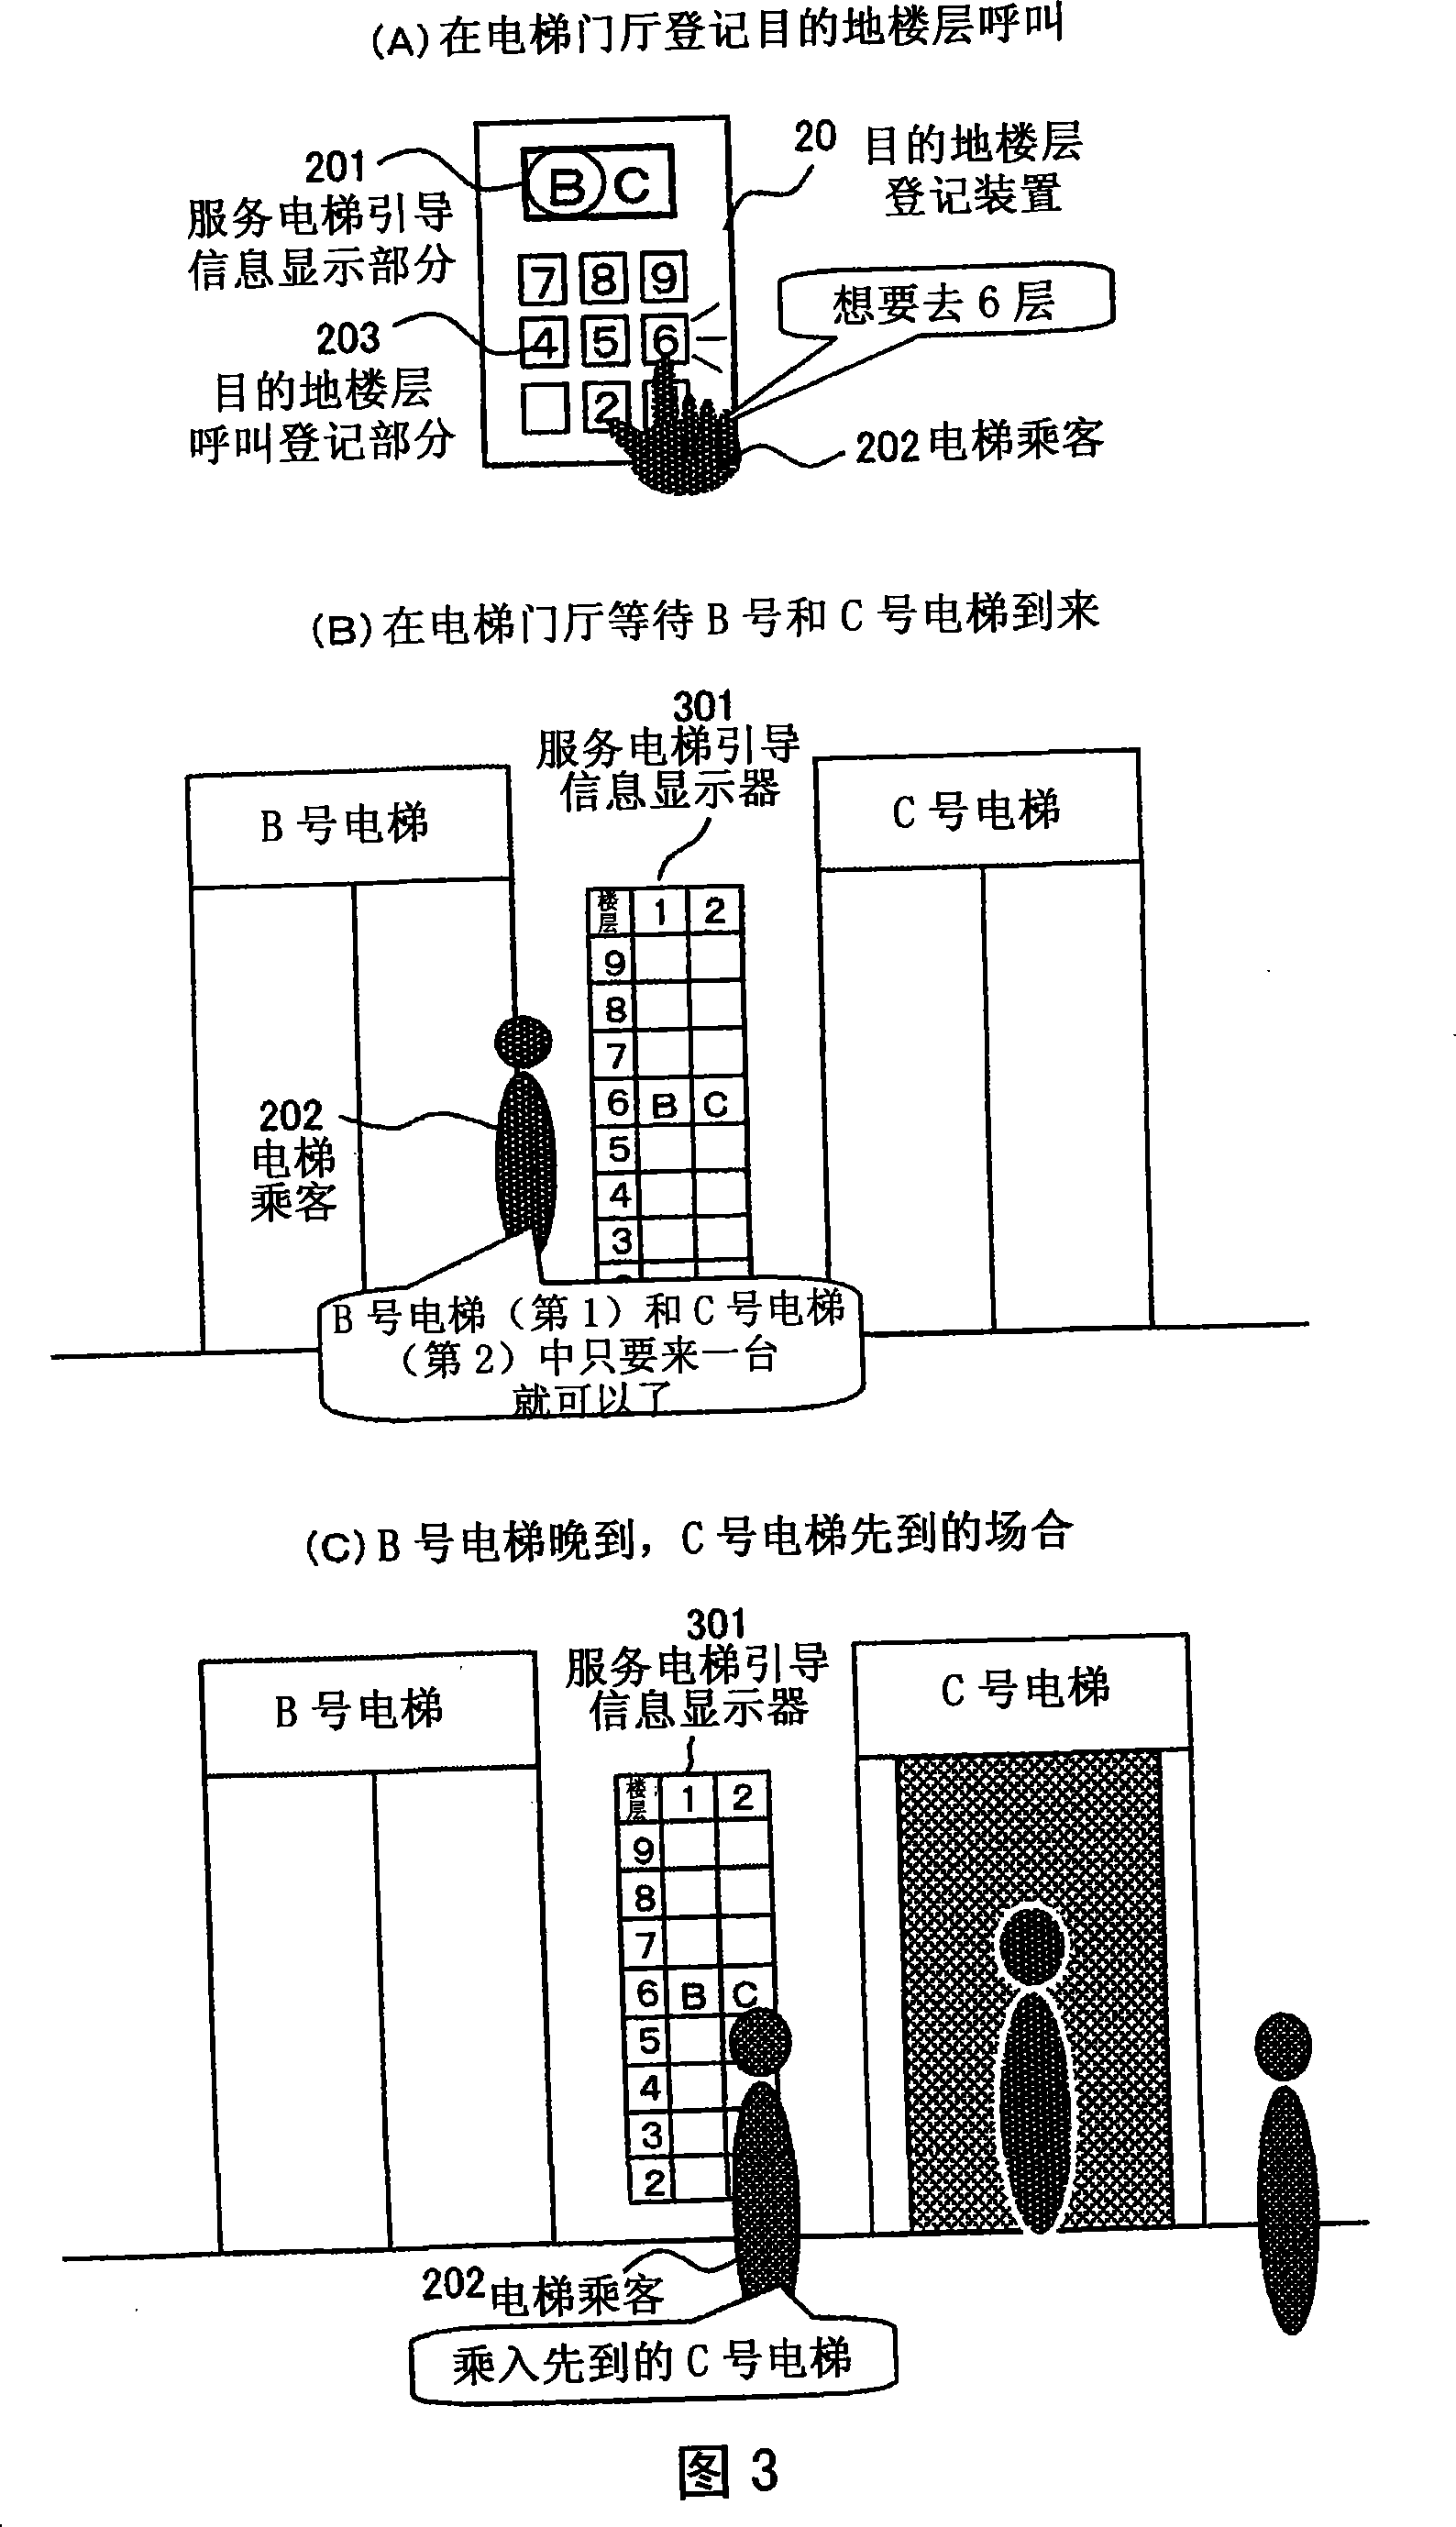 Elevator group management system and displaying method for elevator guiding information thereof